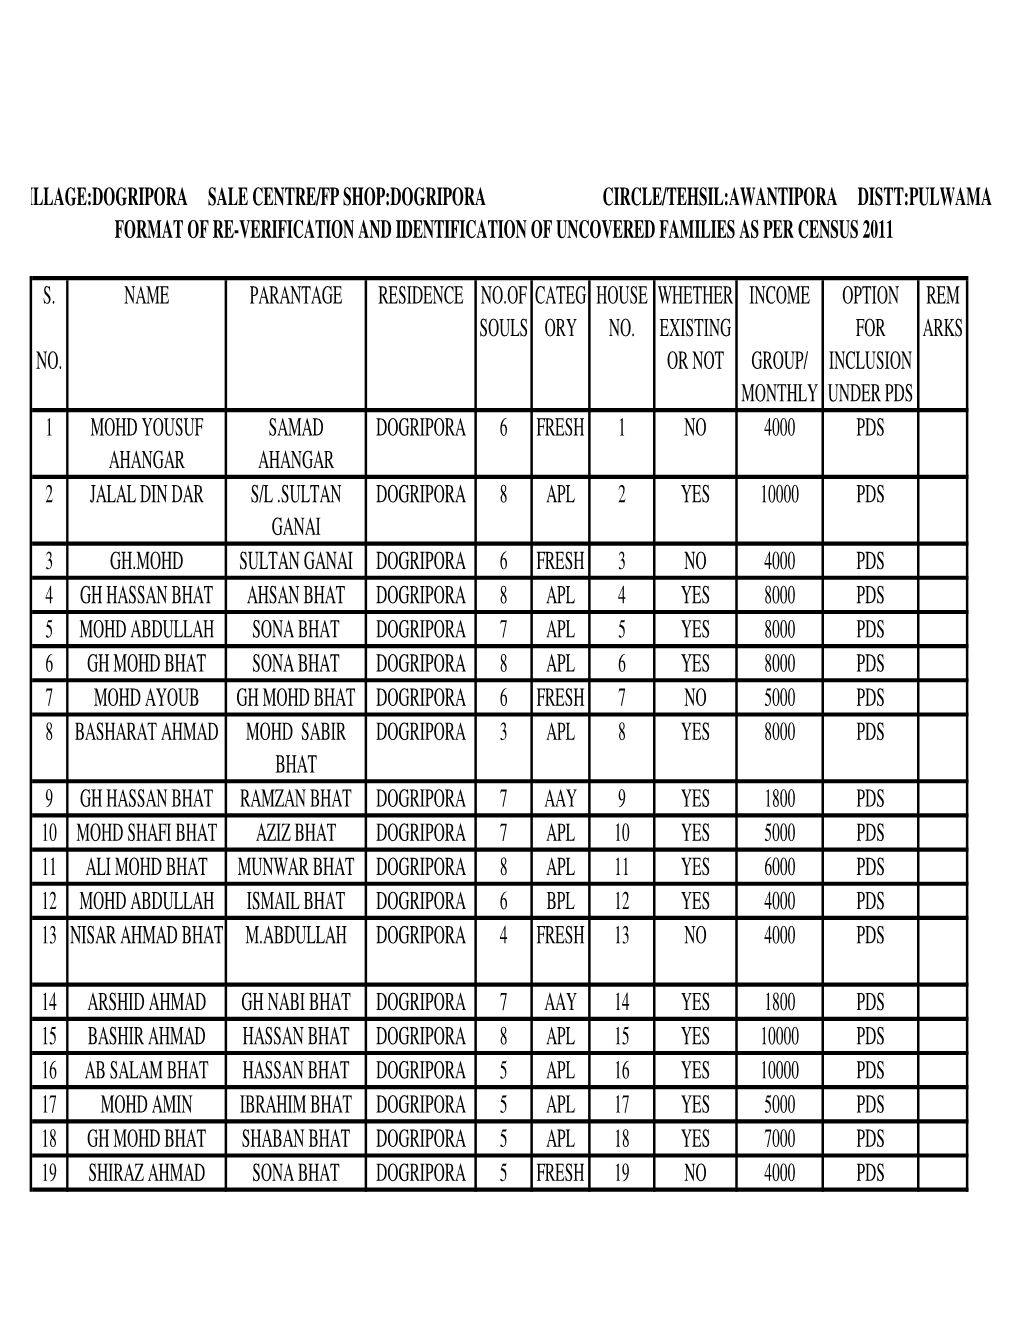 Awantipora Distt:Pulwama Format of Re-Verification and Identification of Uncovered Families As Per Census 2011